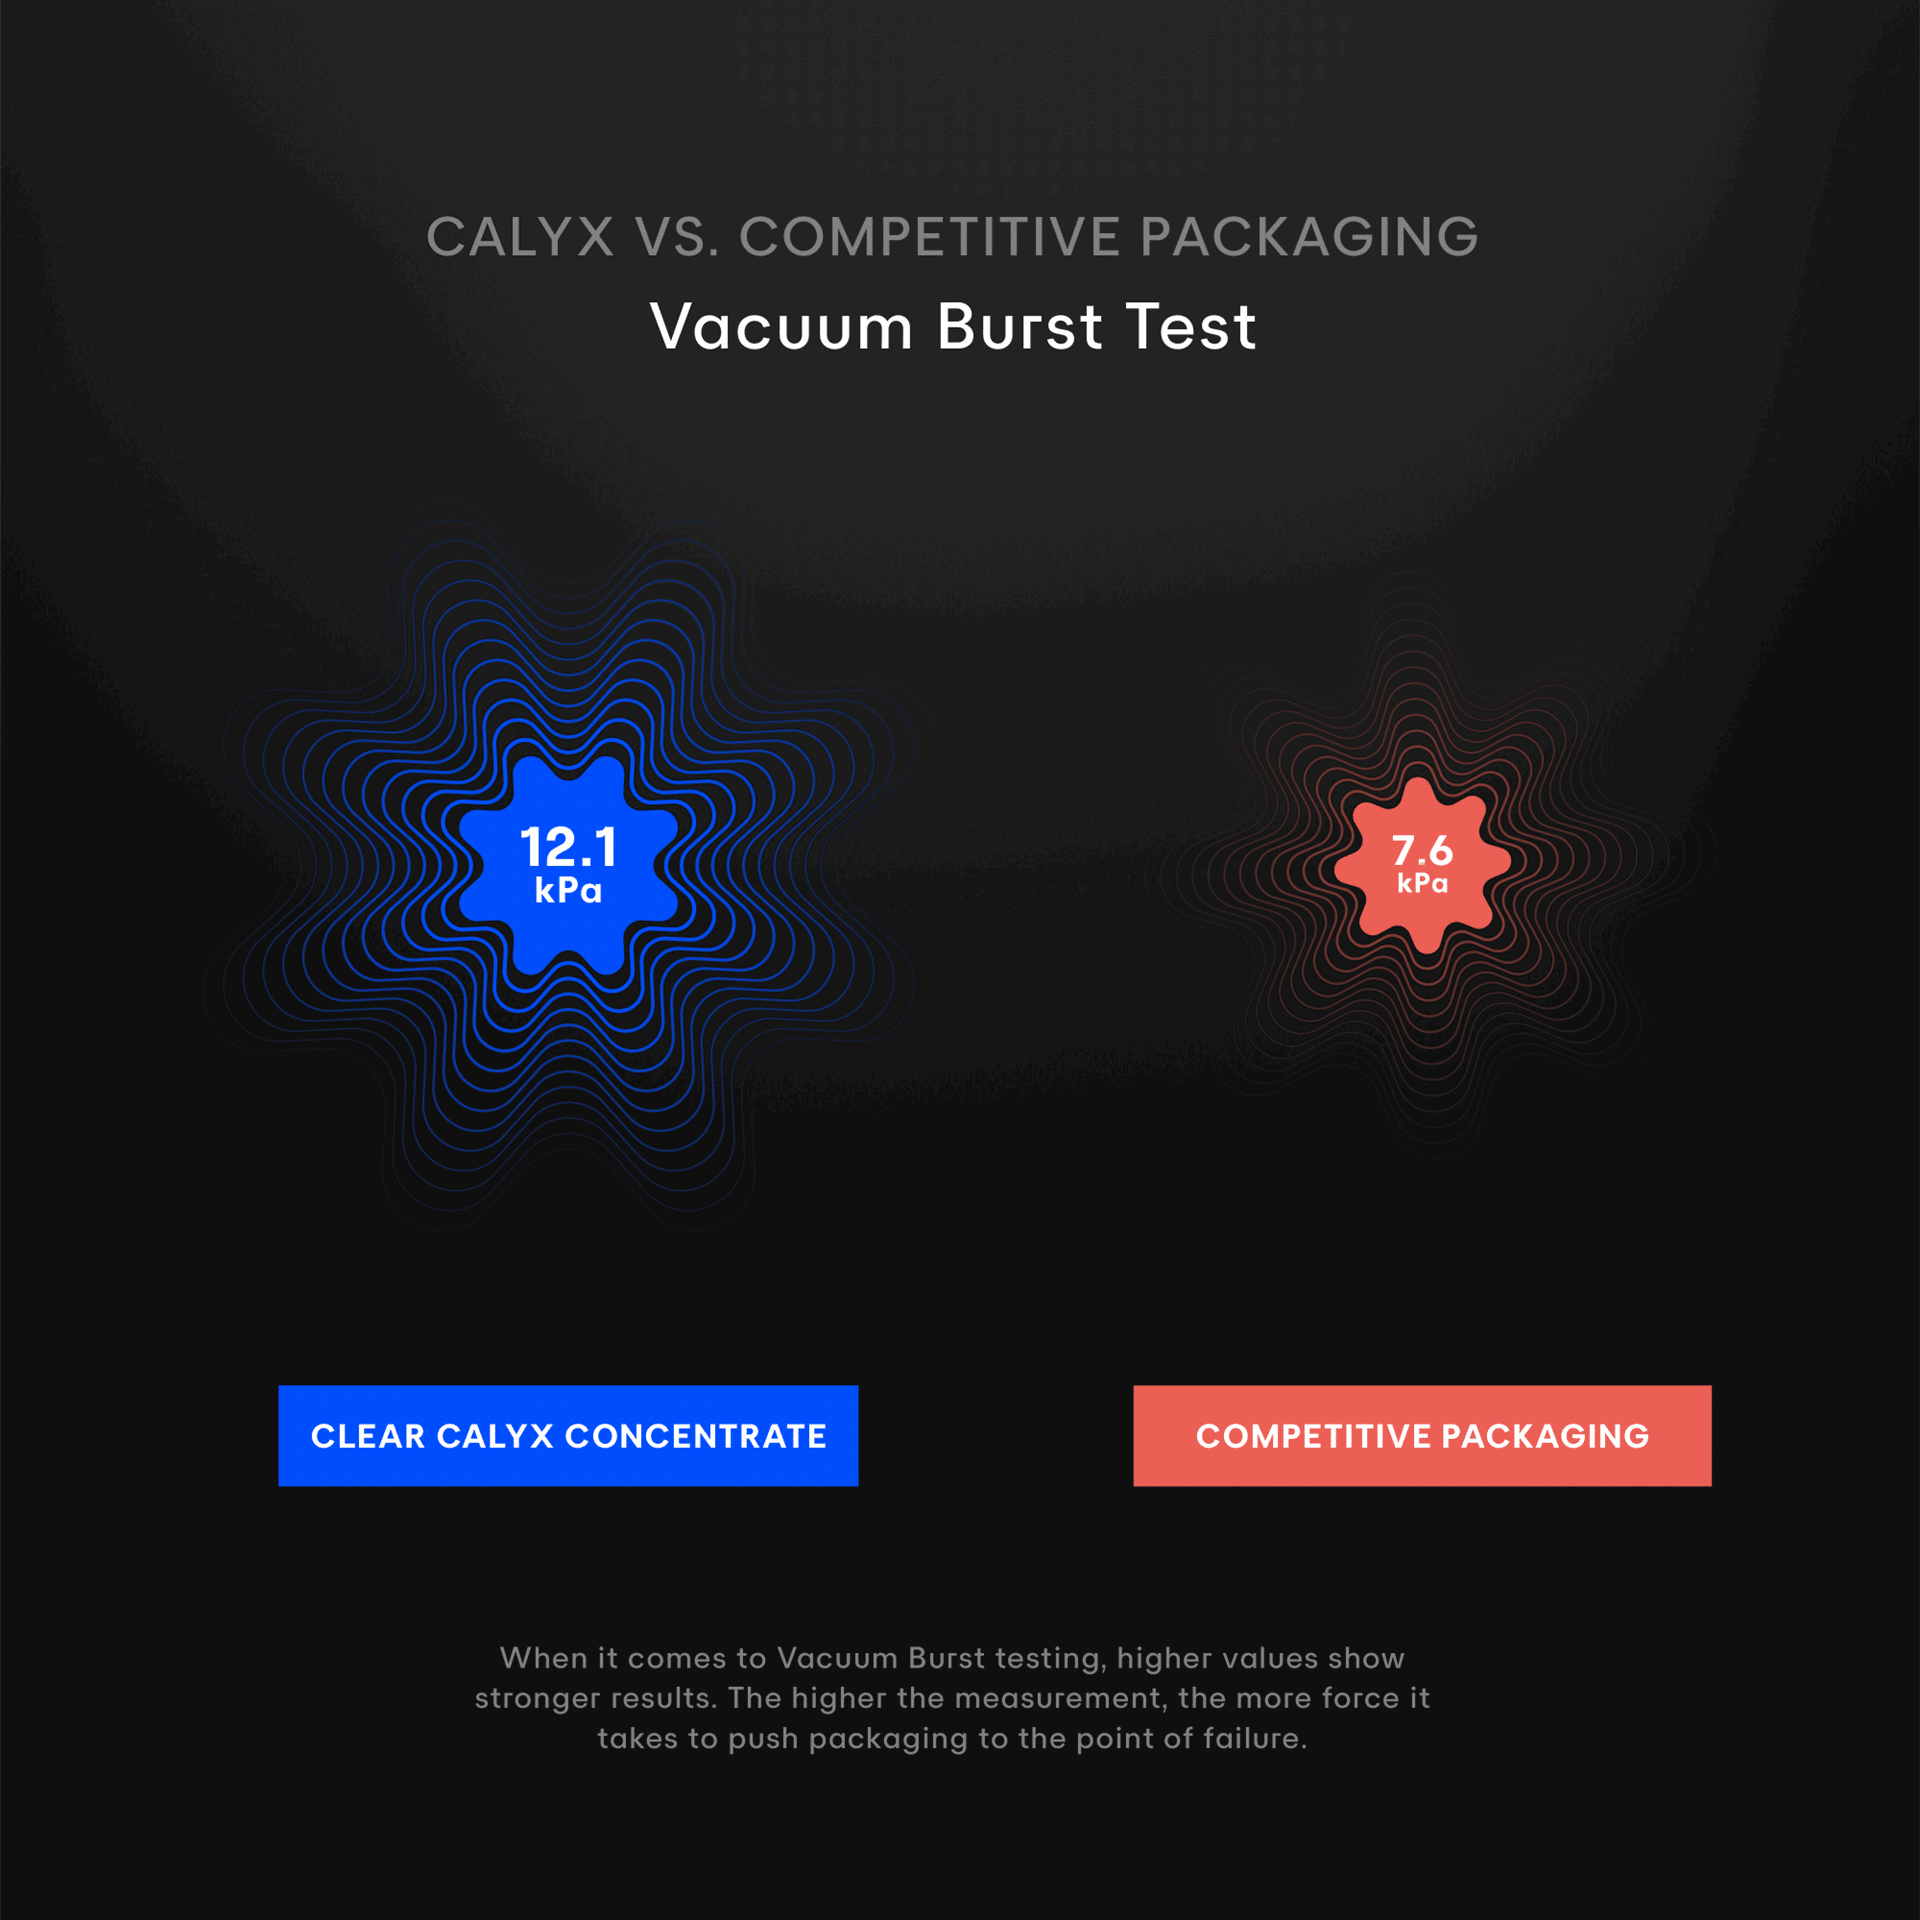 Calyx vacuum burst test results compared to competitors